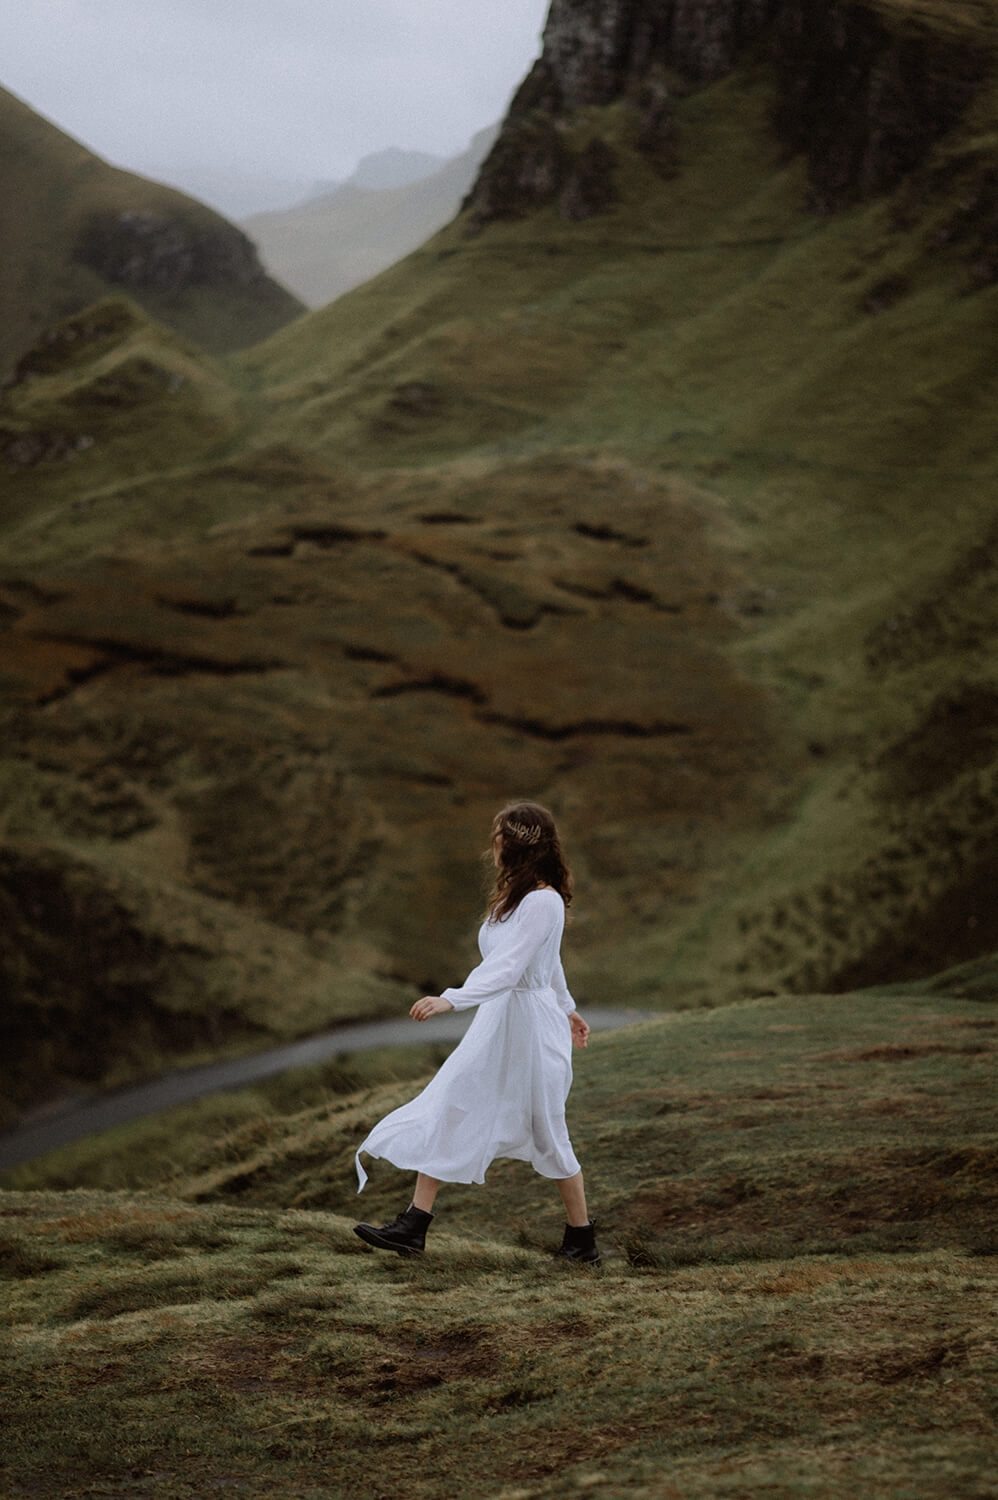 Walking through the Quiraing on the day of the elopement.